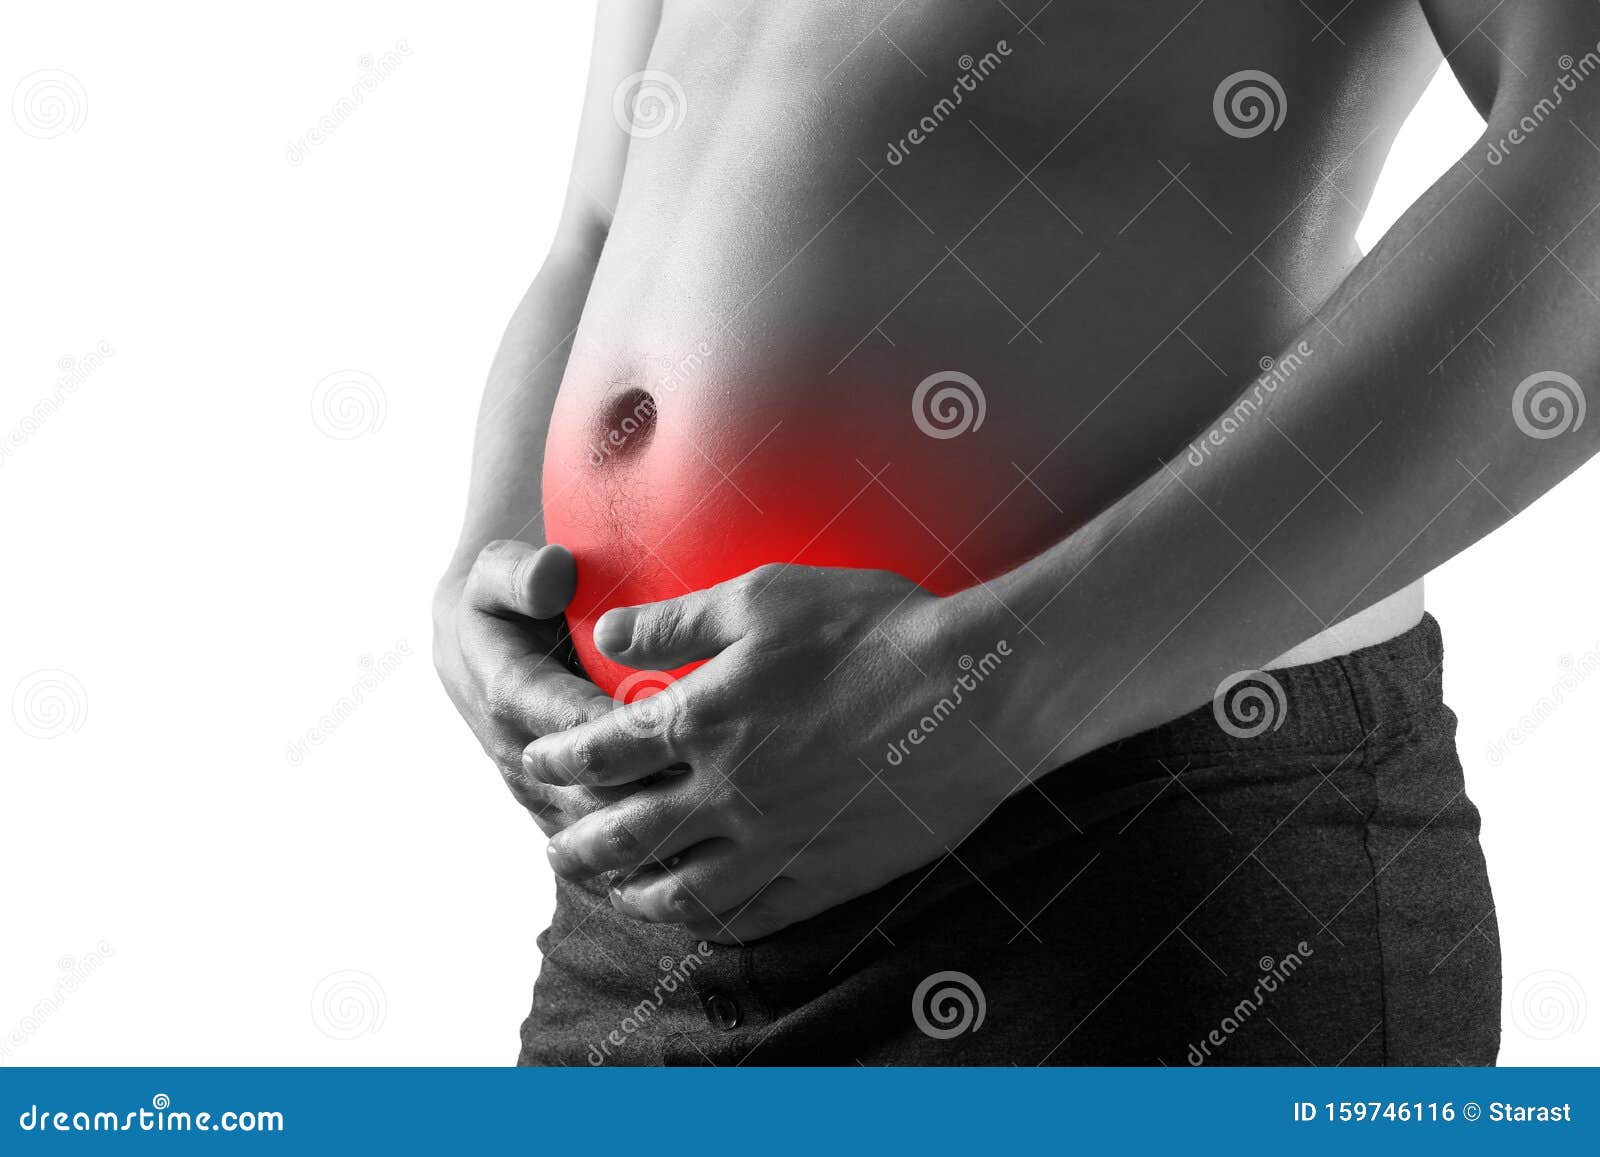 fat man with bloating and abdominal pain, overweight male body  on white background